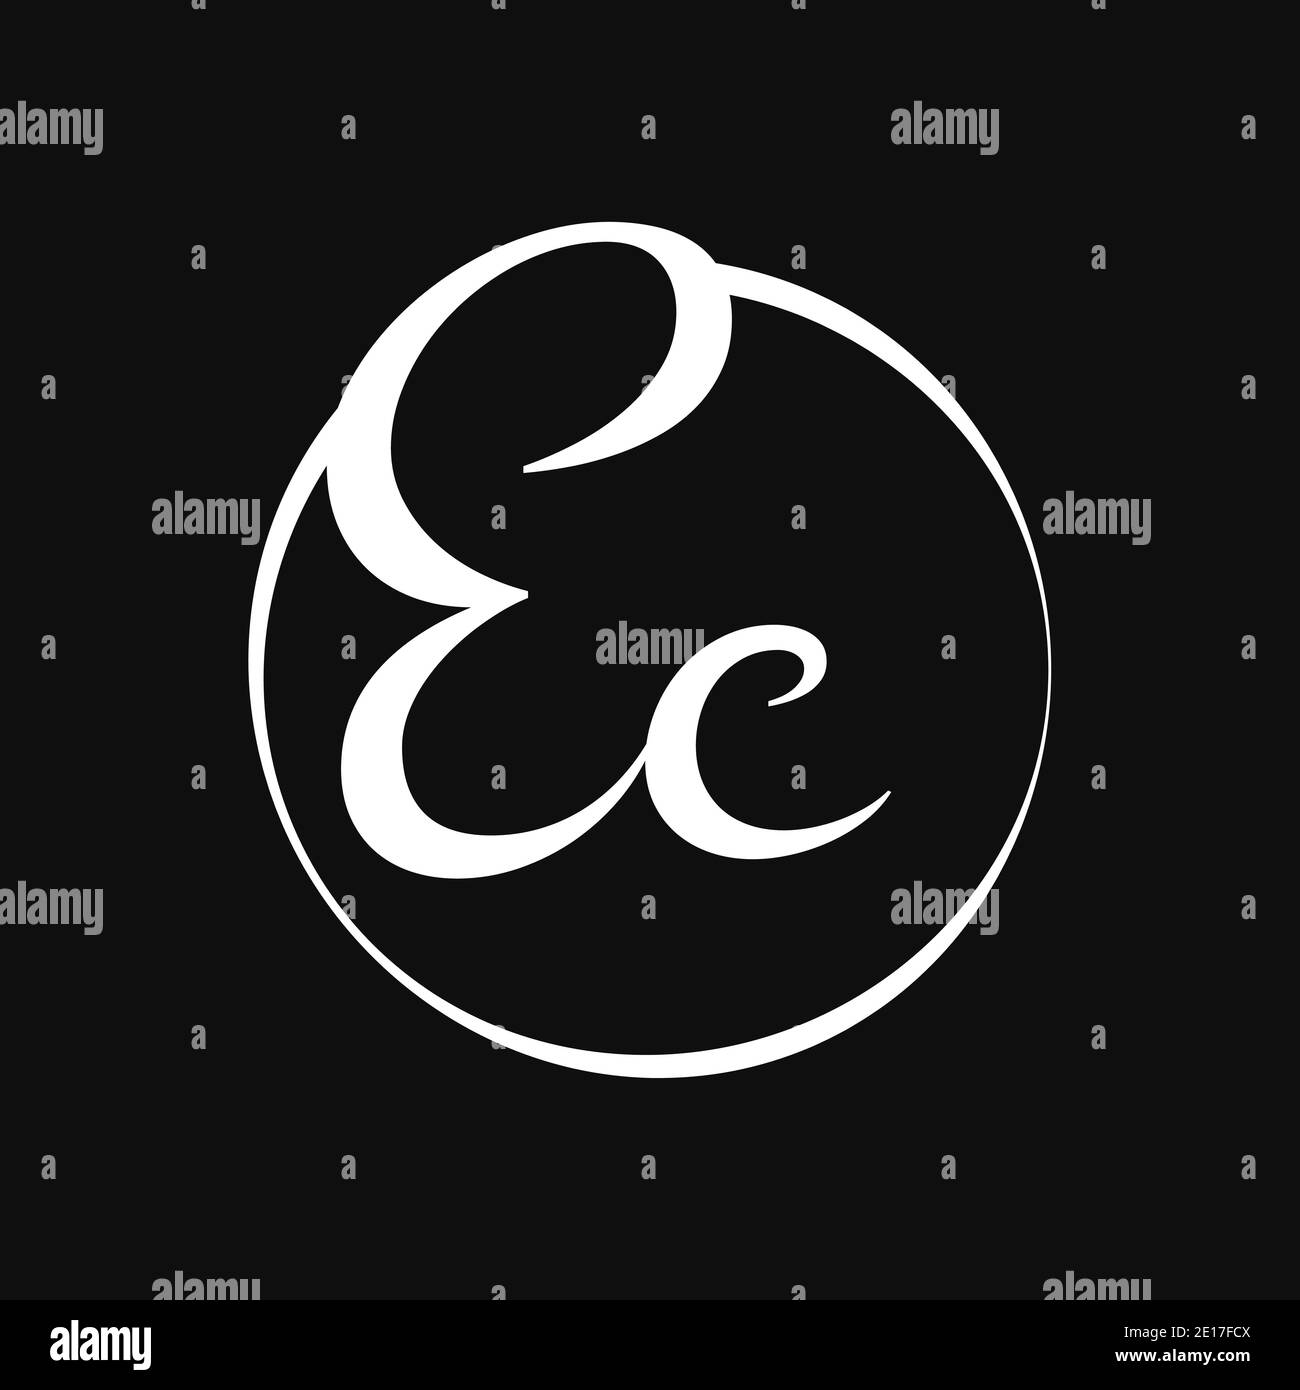 Initial EC Script Letter Type Logo Design With Modern Typography Vector Template. Creative Script Letter EC Logo Design Stock Vector